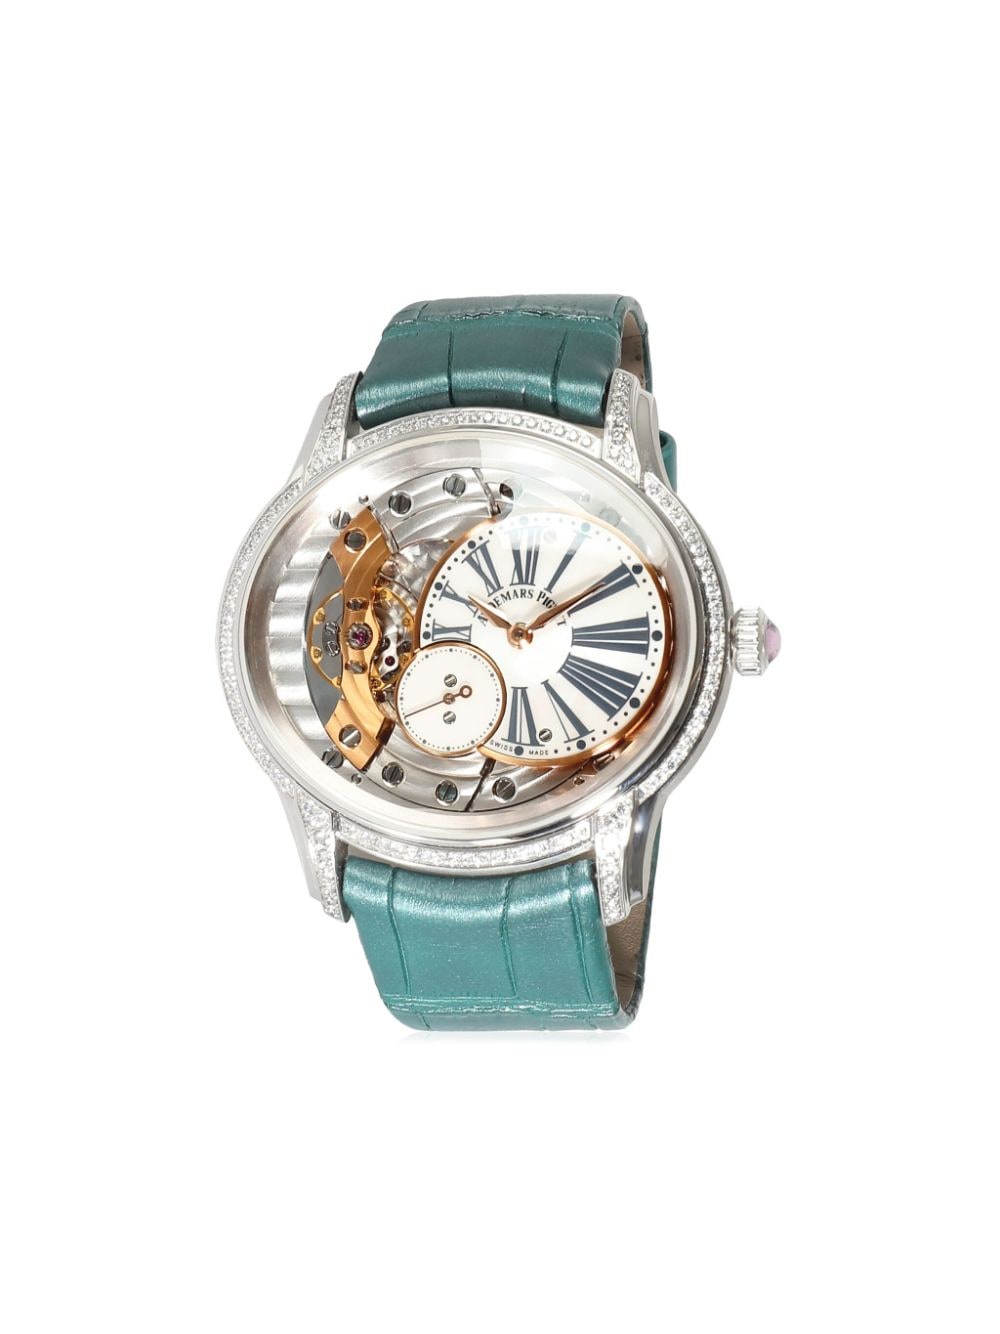 2010-2019 pre-owned Millenary 40mm